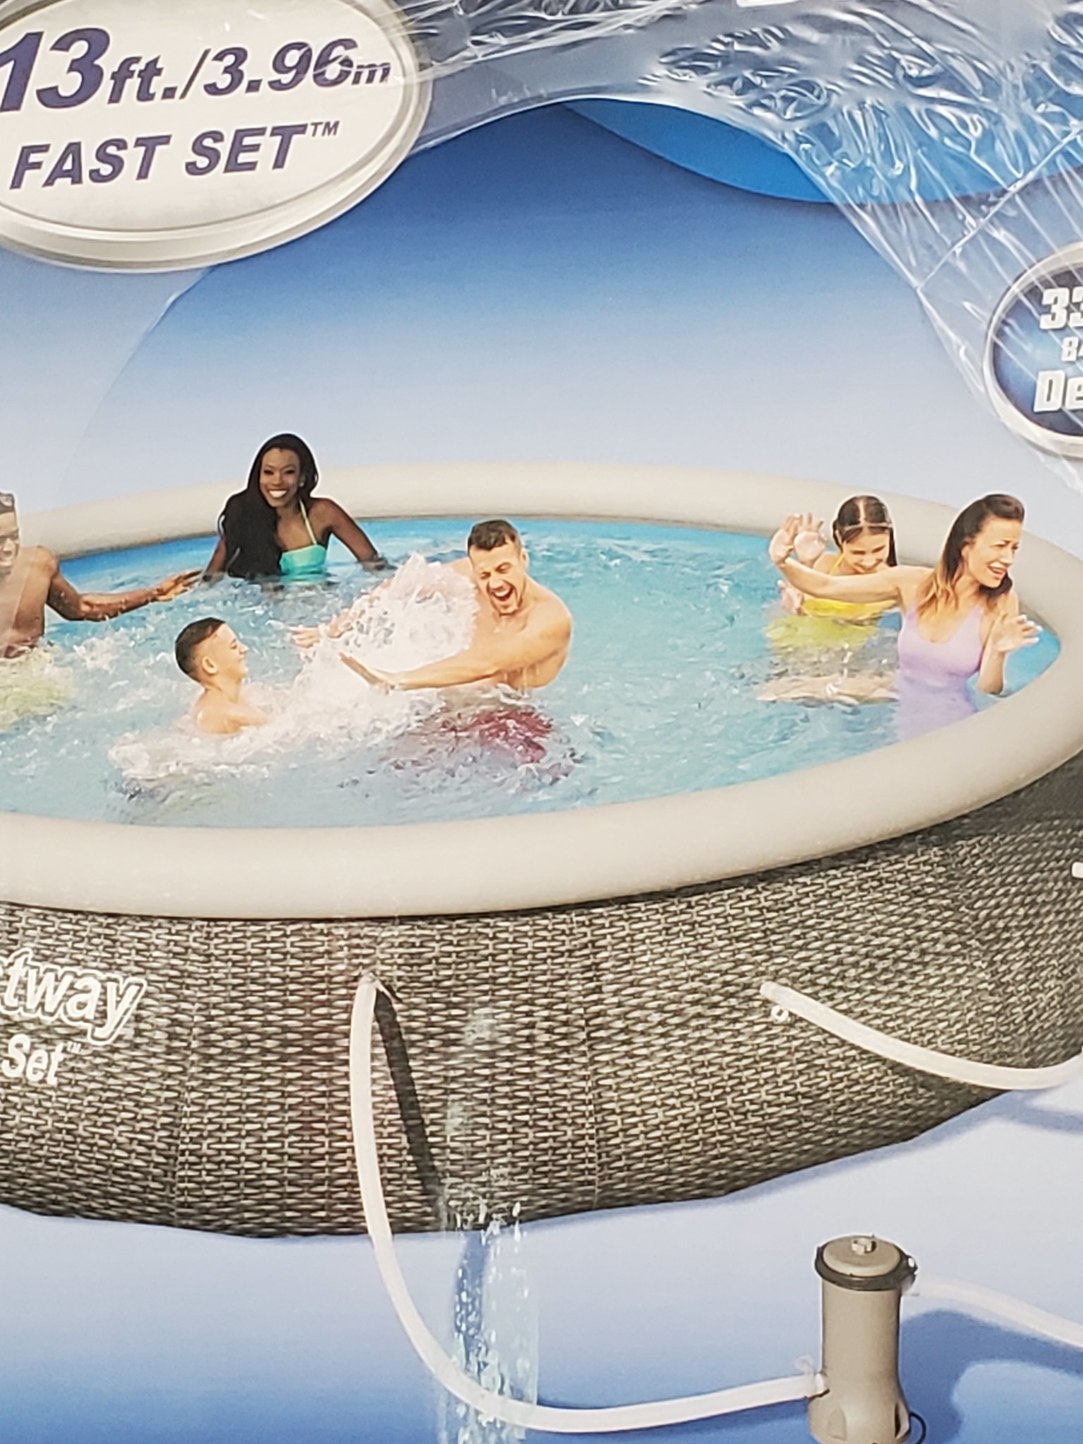 You cant tell me that these people are really having that much fun in a small pool. - meme